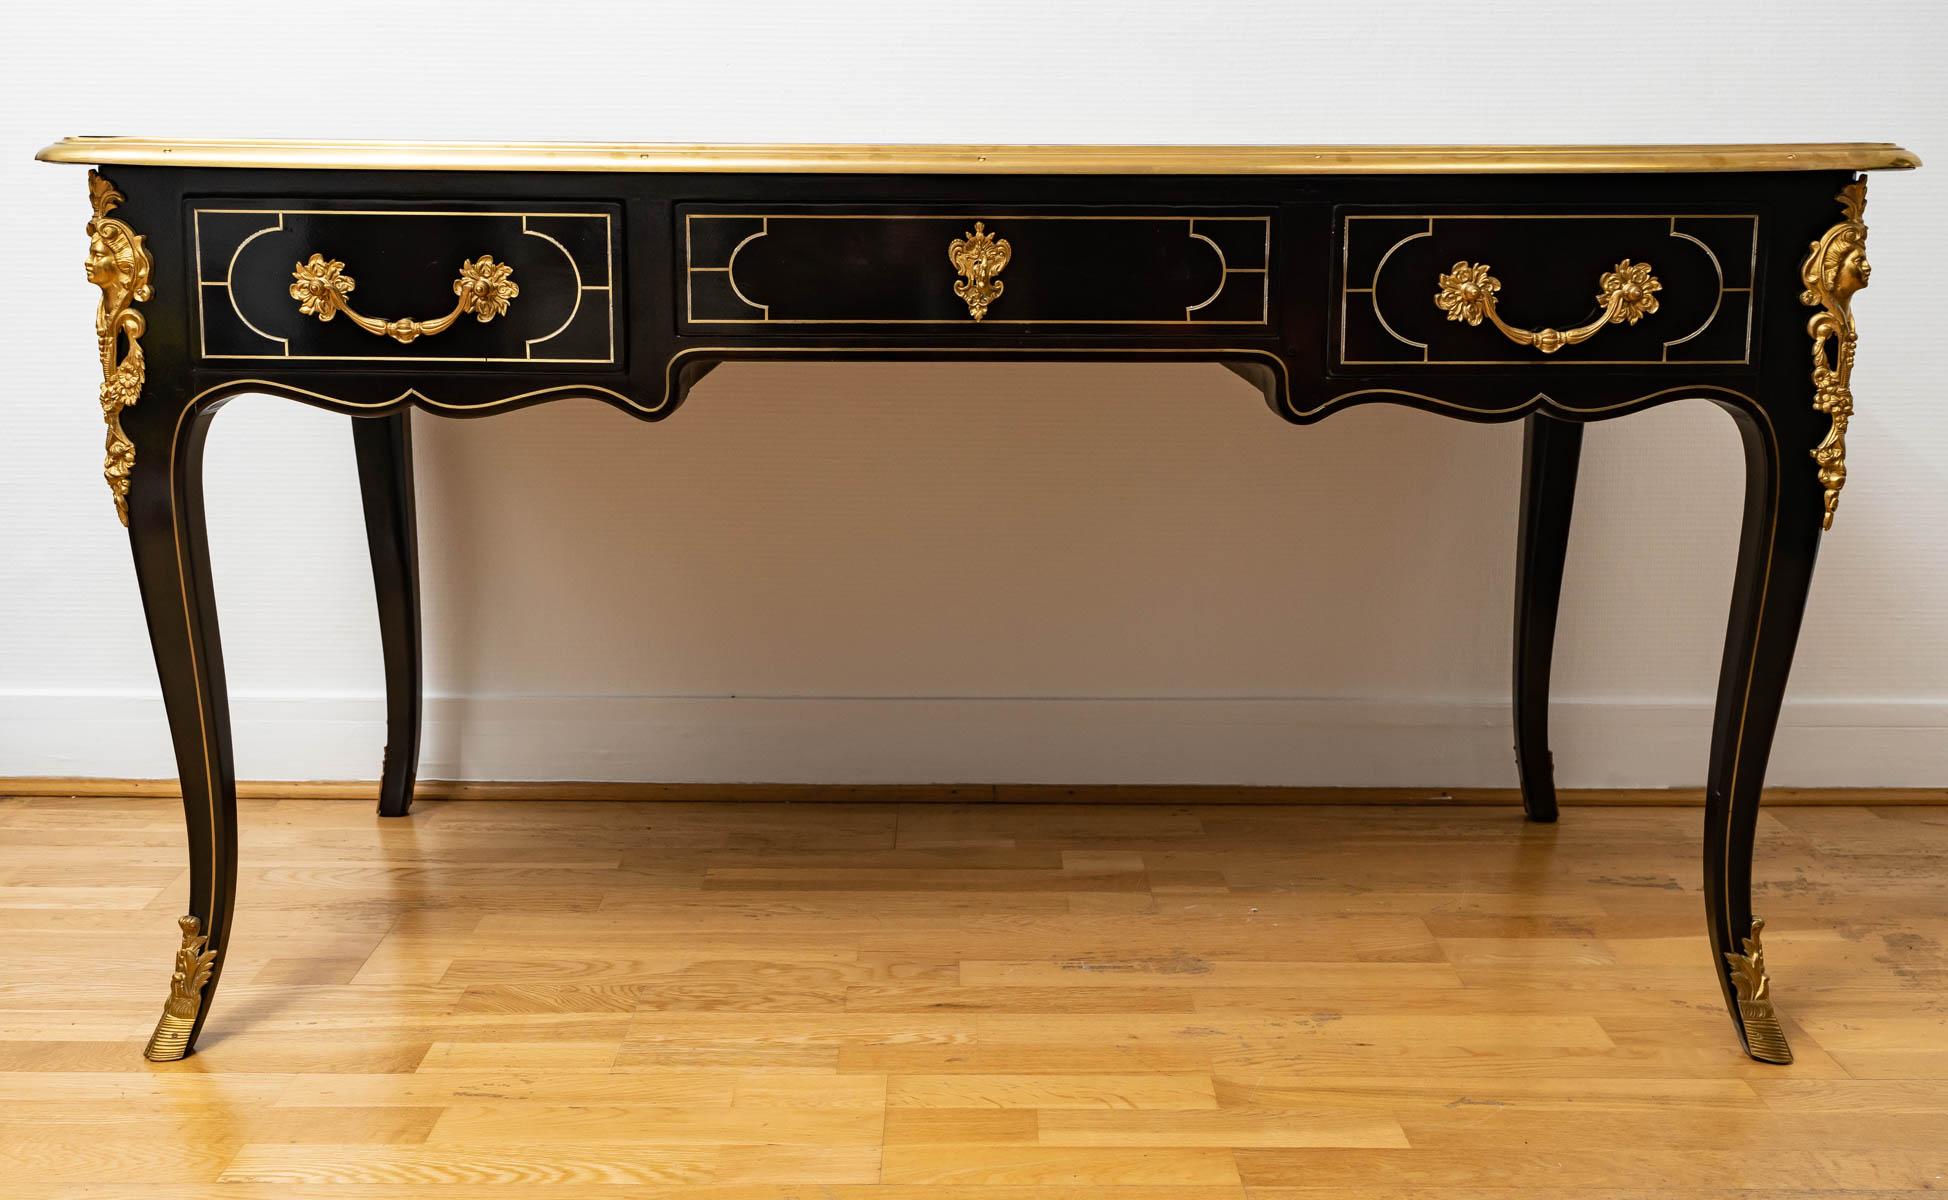 19th Century Magnificent Flat Desk in Blackened Wood and Bronzes, Napoleon III Style For Sale